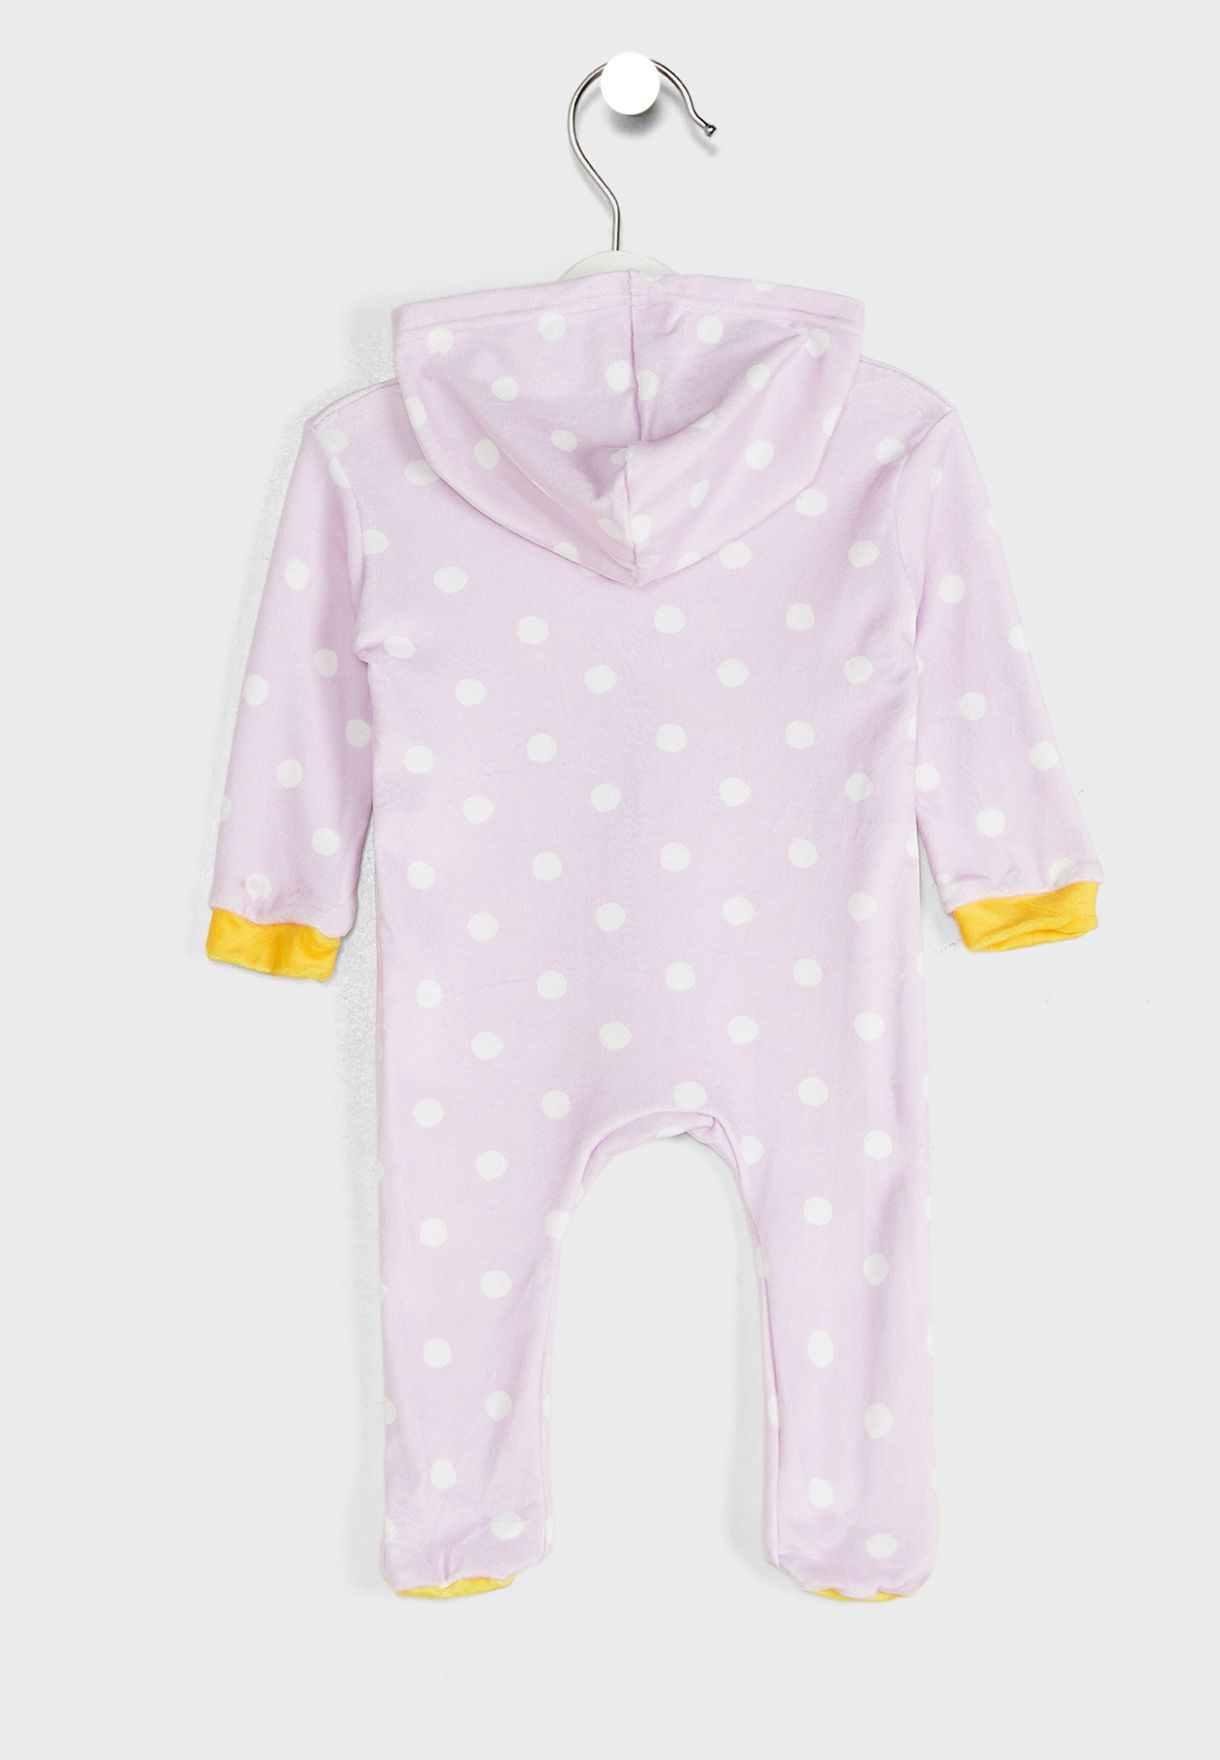 Infant Snoopy Romper